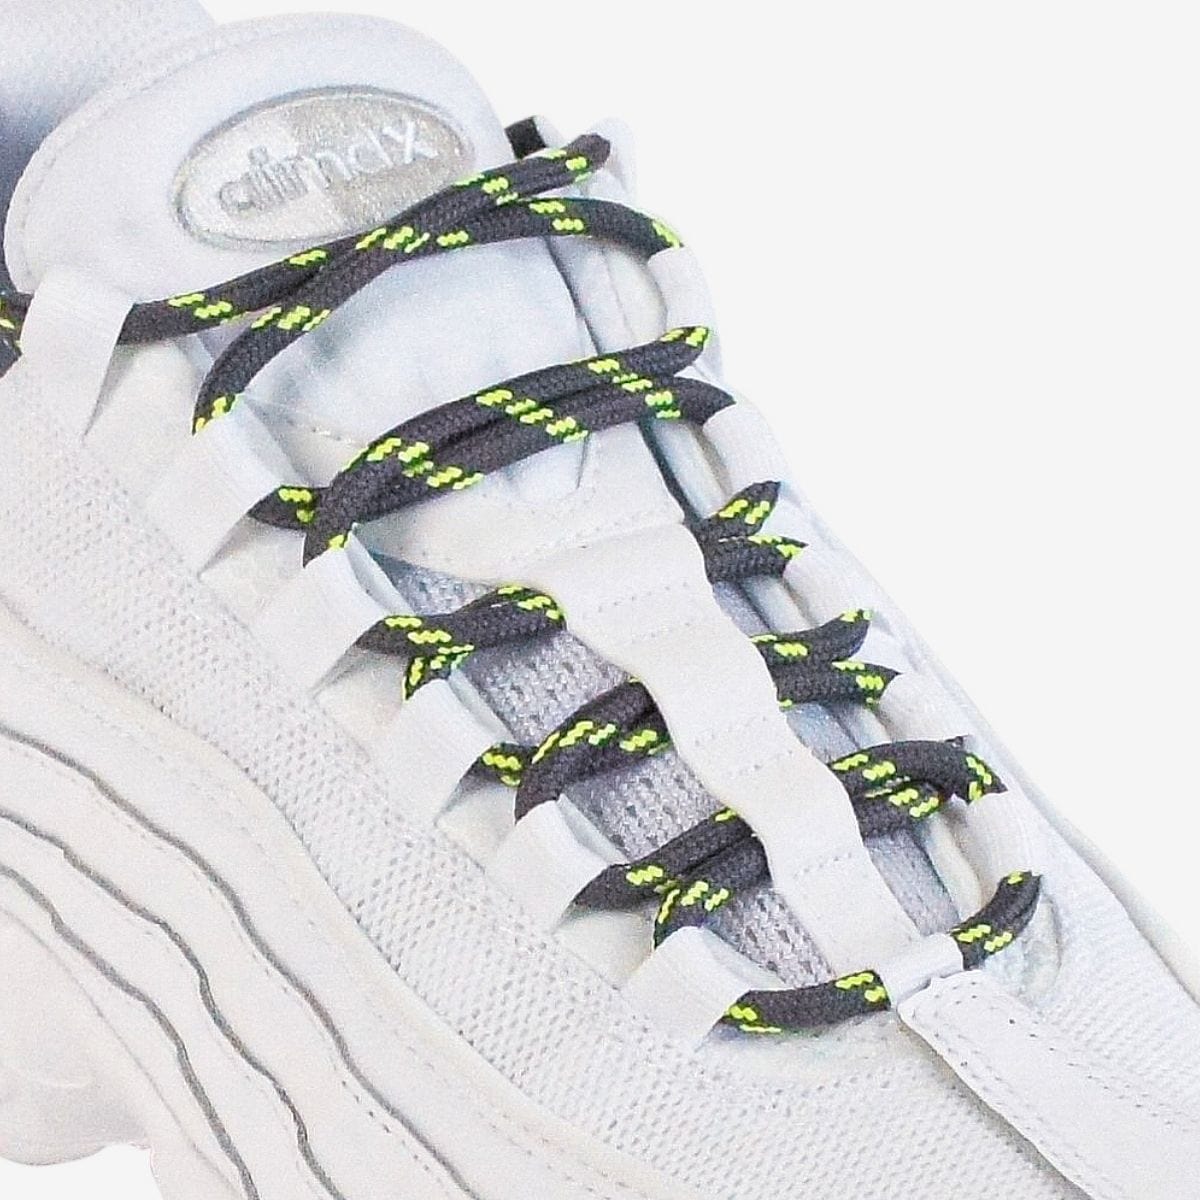 walking-shoe-laces-online-in-australia-colour-dark-grey-and-green